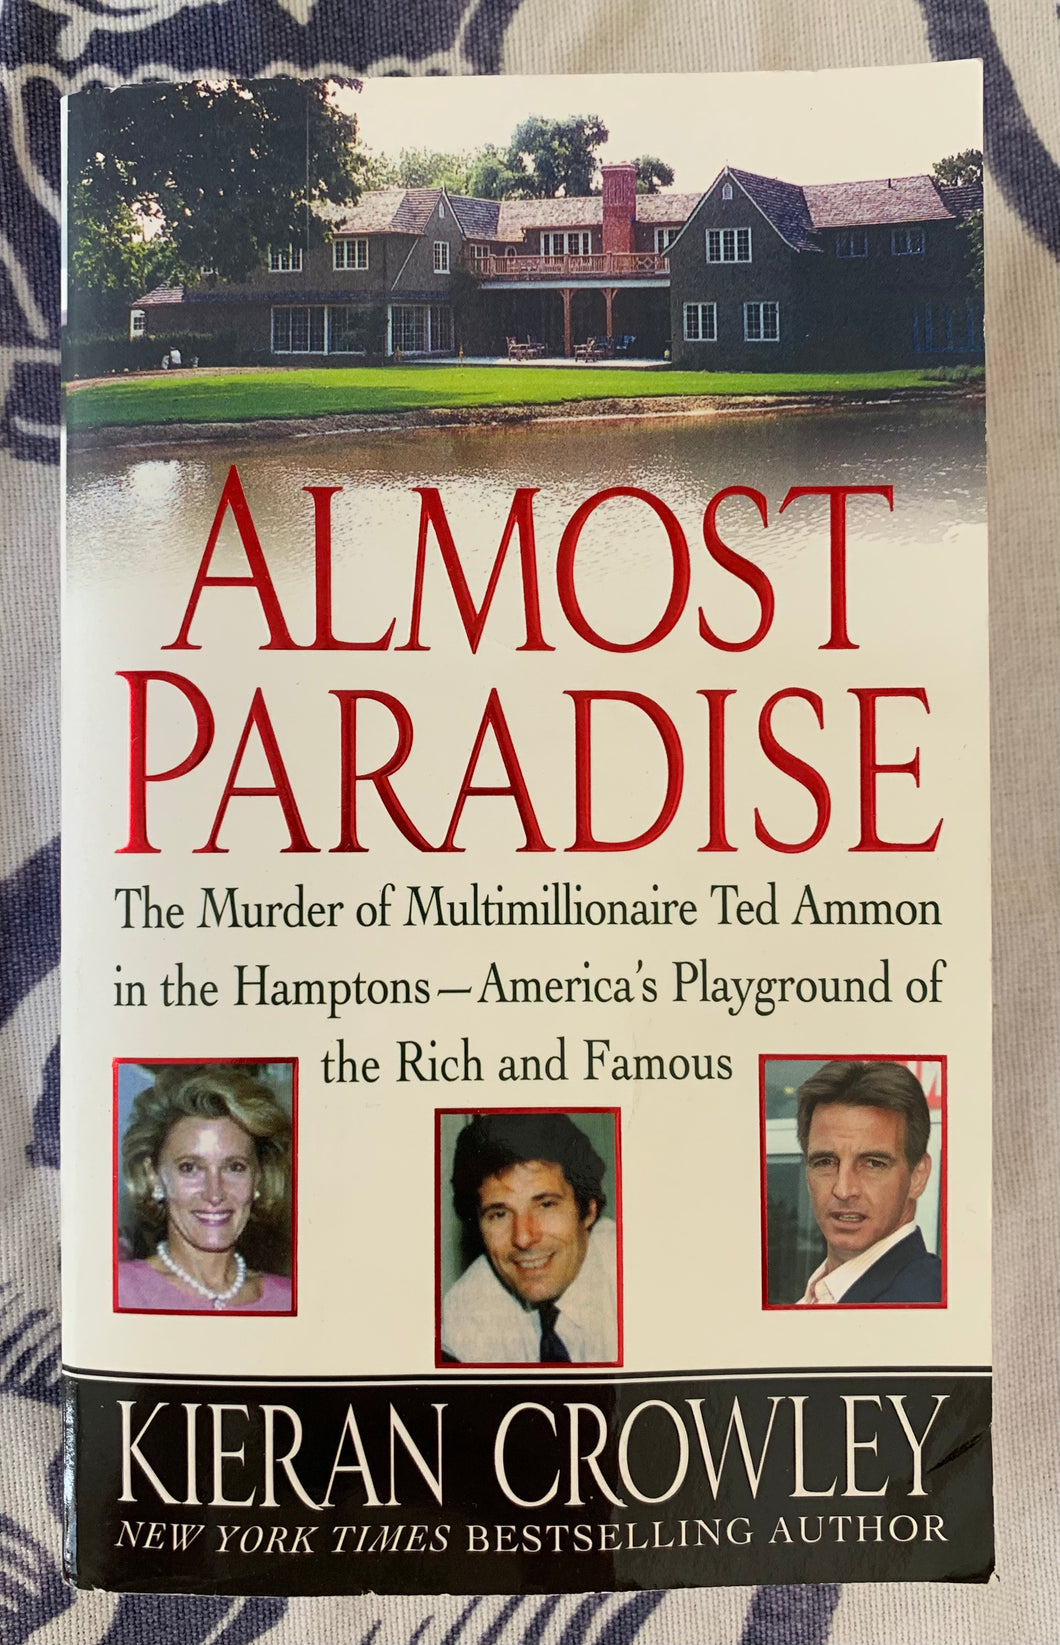 Almost Paradise: The Murder of Multimillionaire Ted Ammon in the Hamptons -- America's Playground of the Rich and Famous